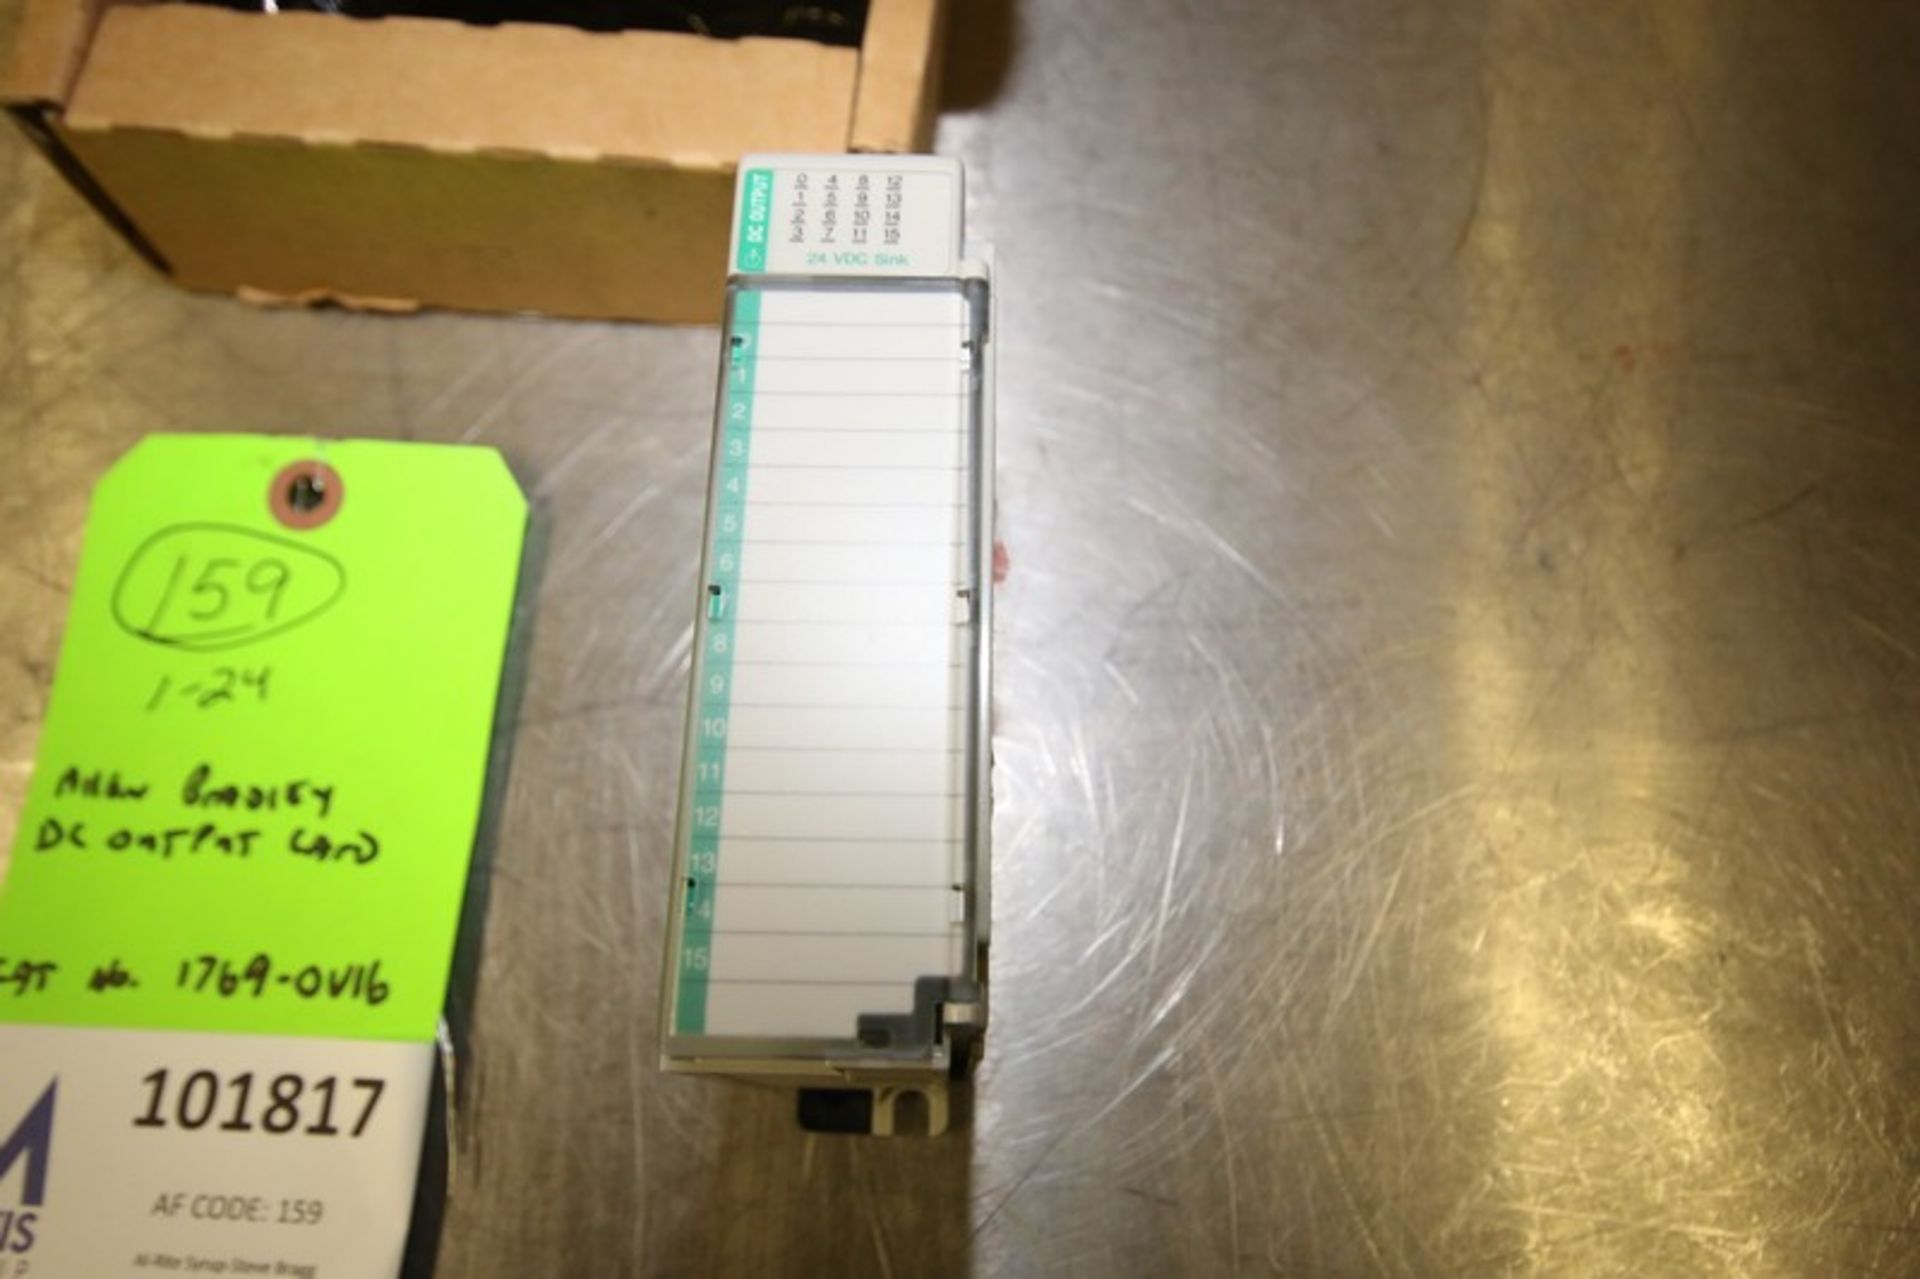 New Allen Bradley DC Output Card for Compact I/O PLC, Cat. No. 1769 Series B (INV#101817) (Located @ - Image 2 of 3